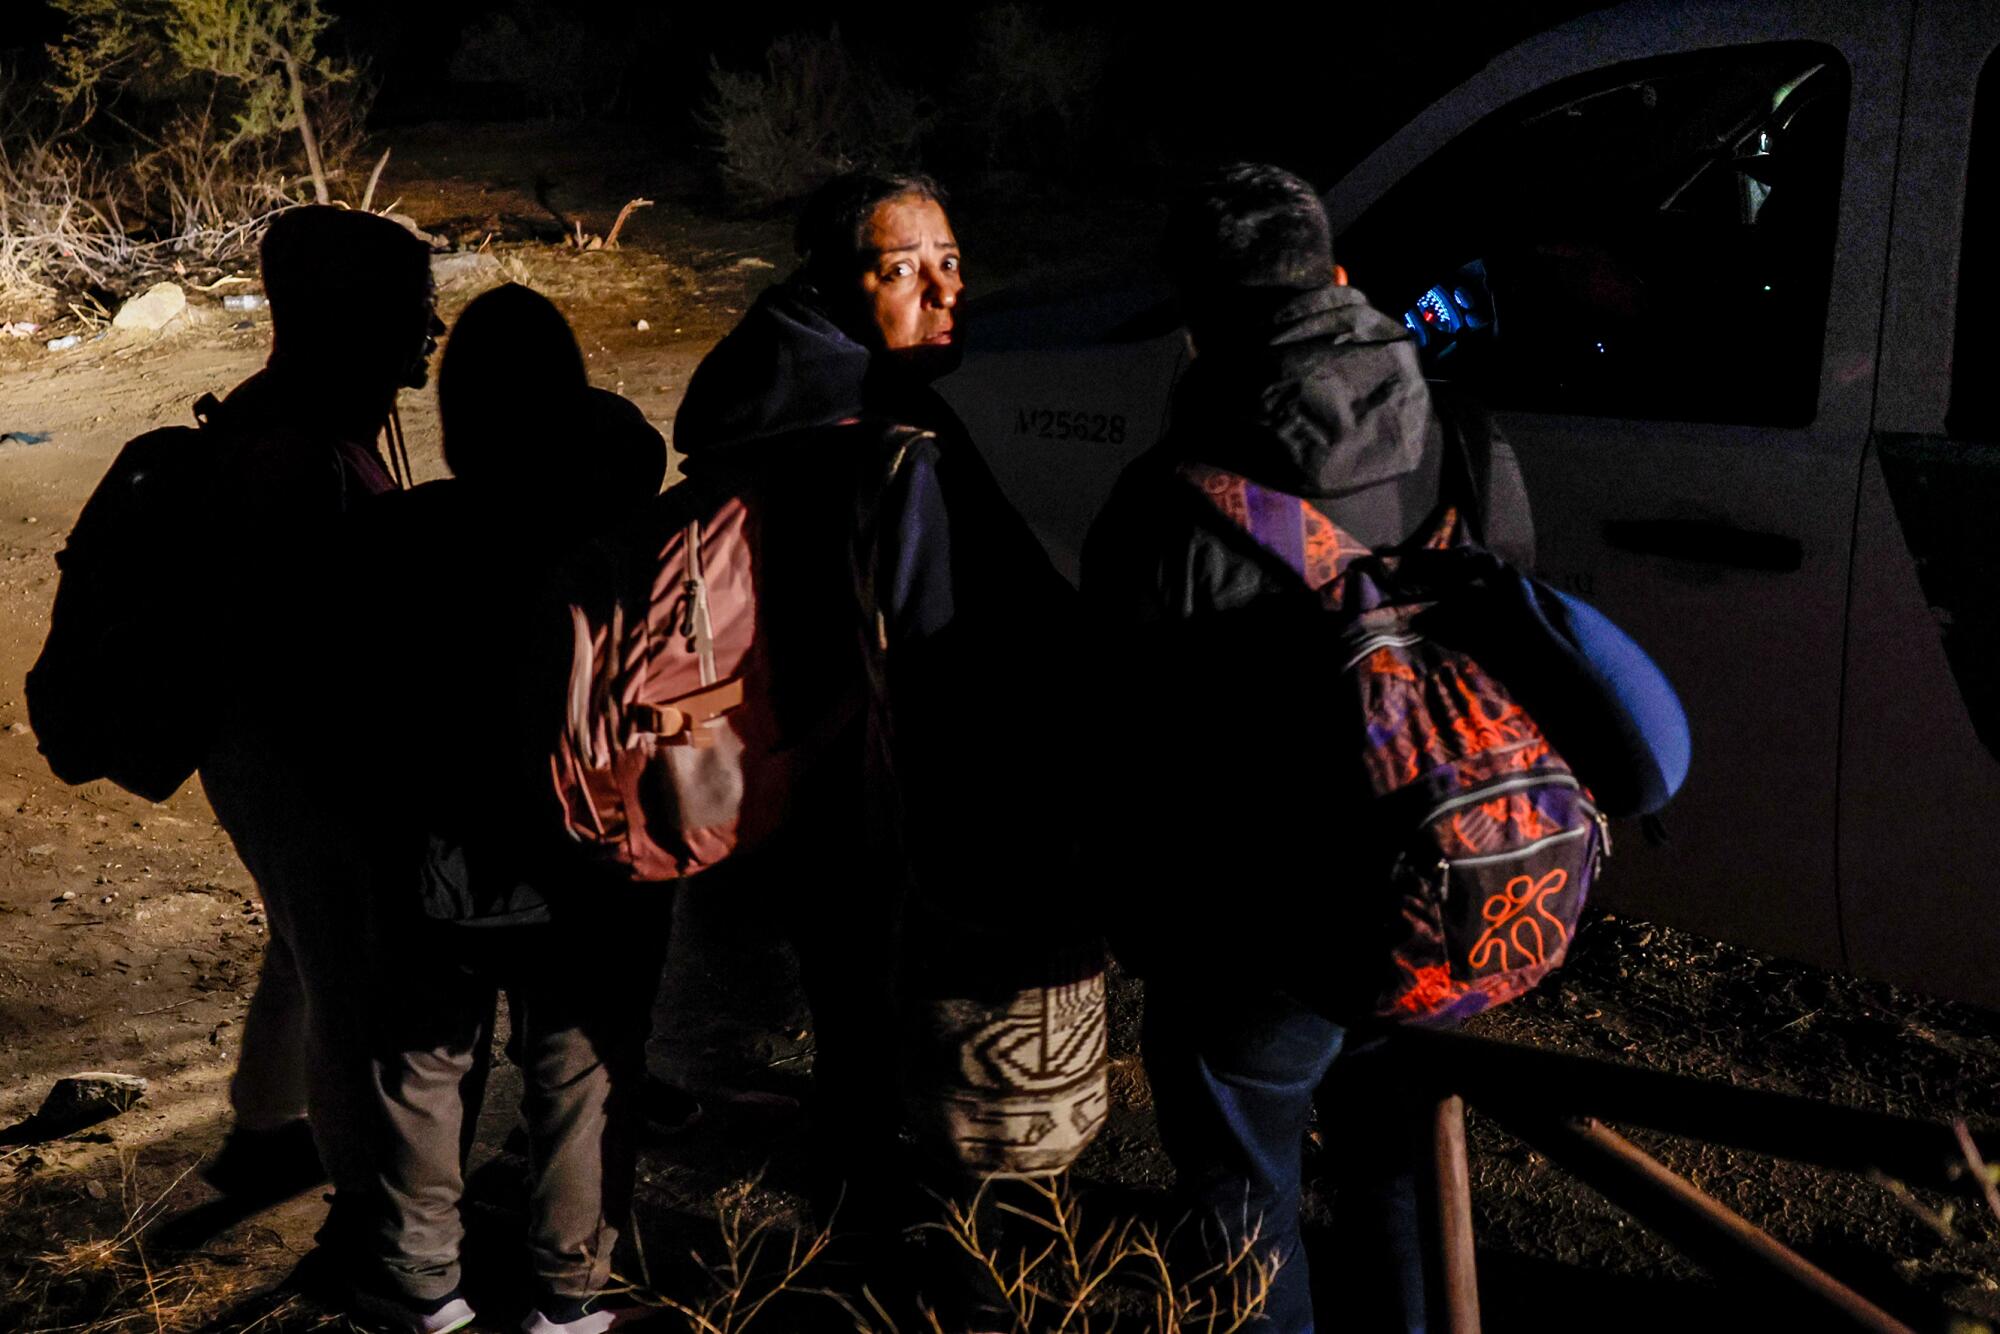  A migrant family from Colombia huddles in the darkness.